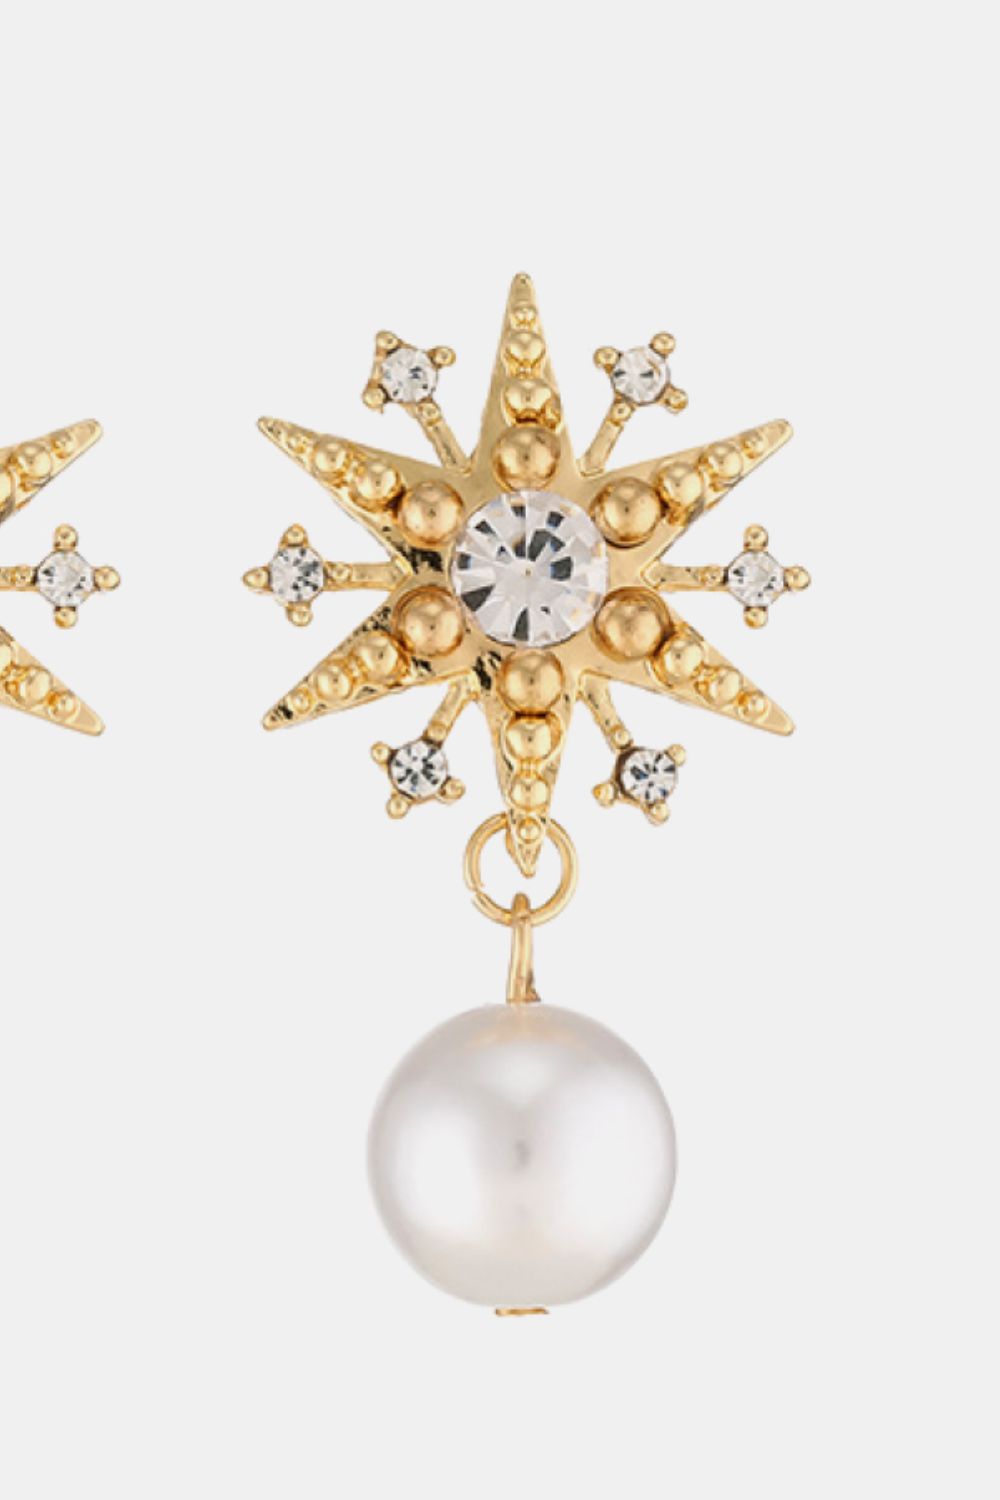 SYNTHETIC PEARL STAR SHAPE ALLOY EARRINGS in Gold Tone Finish